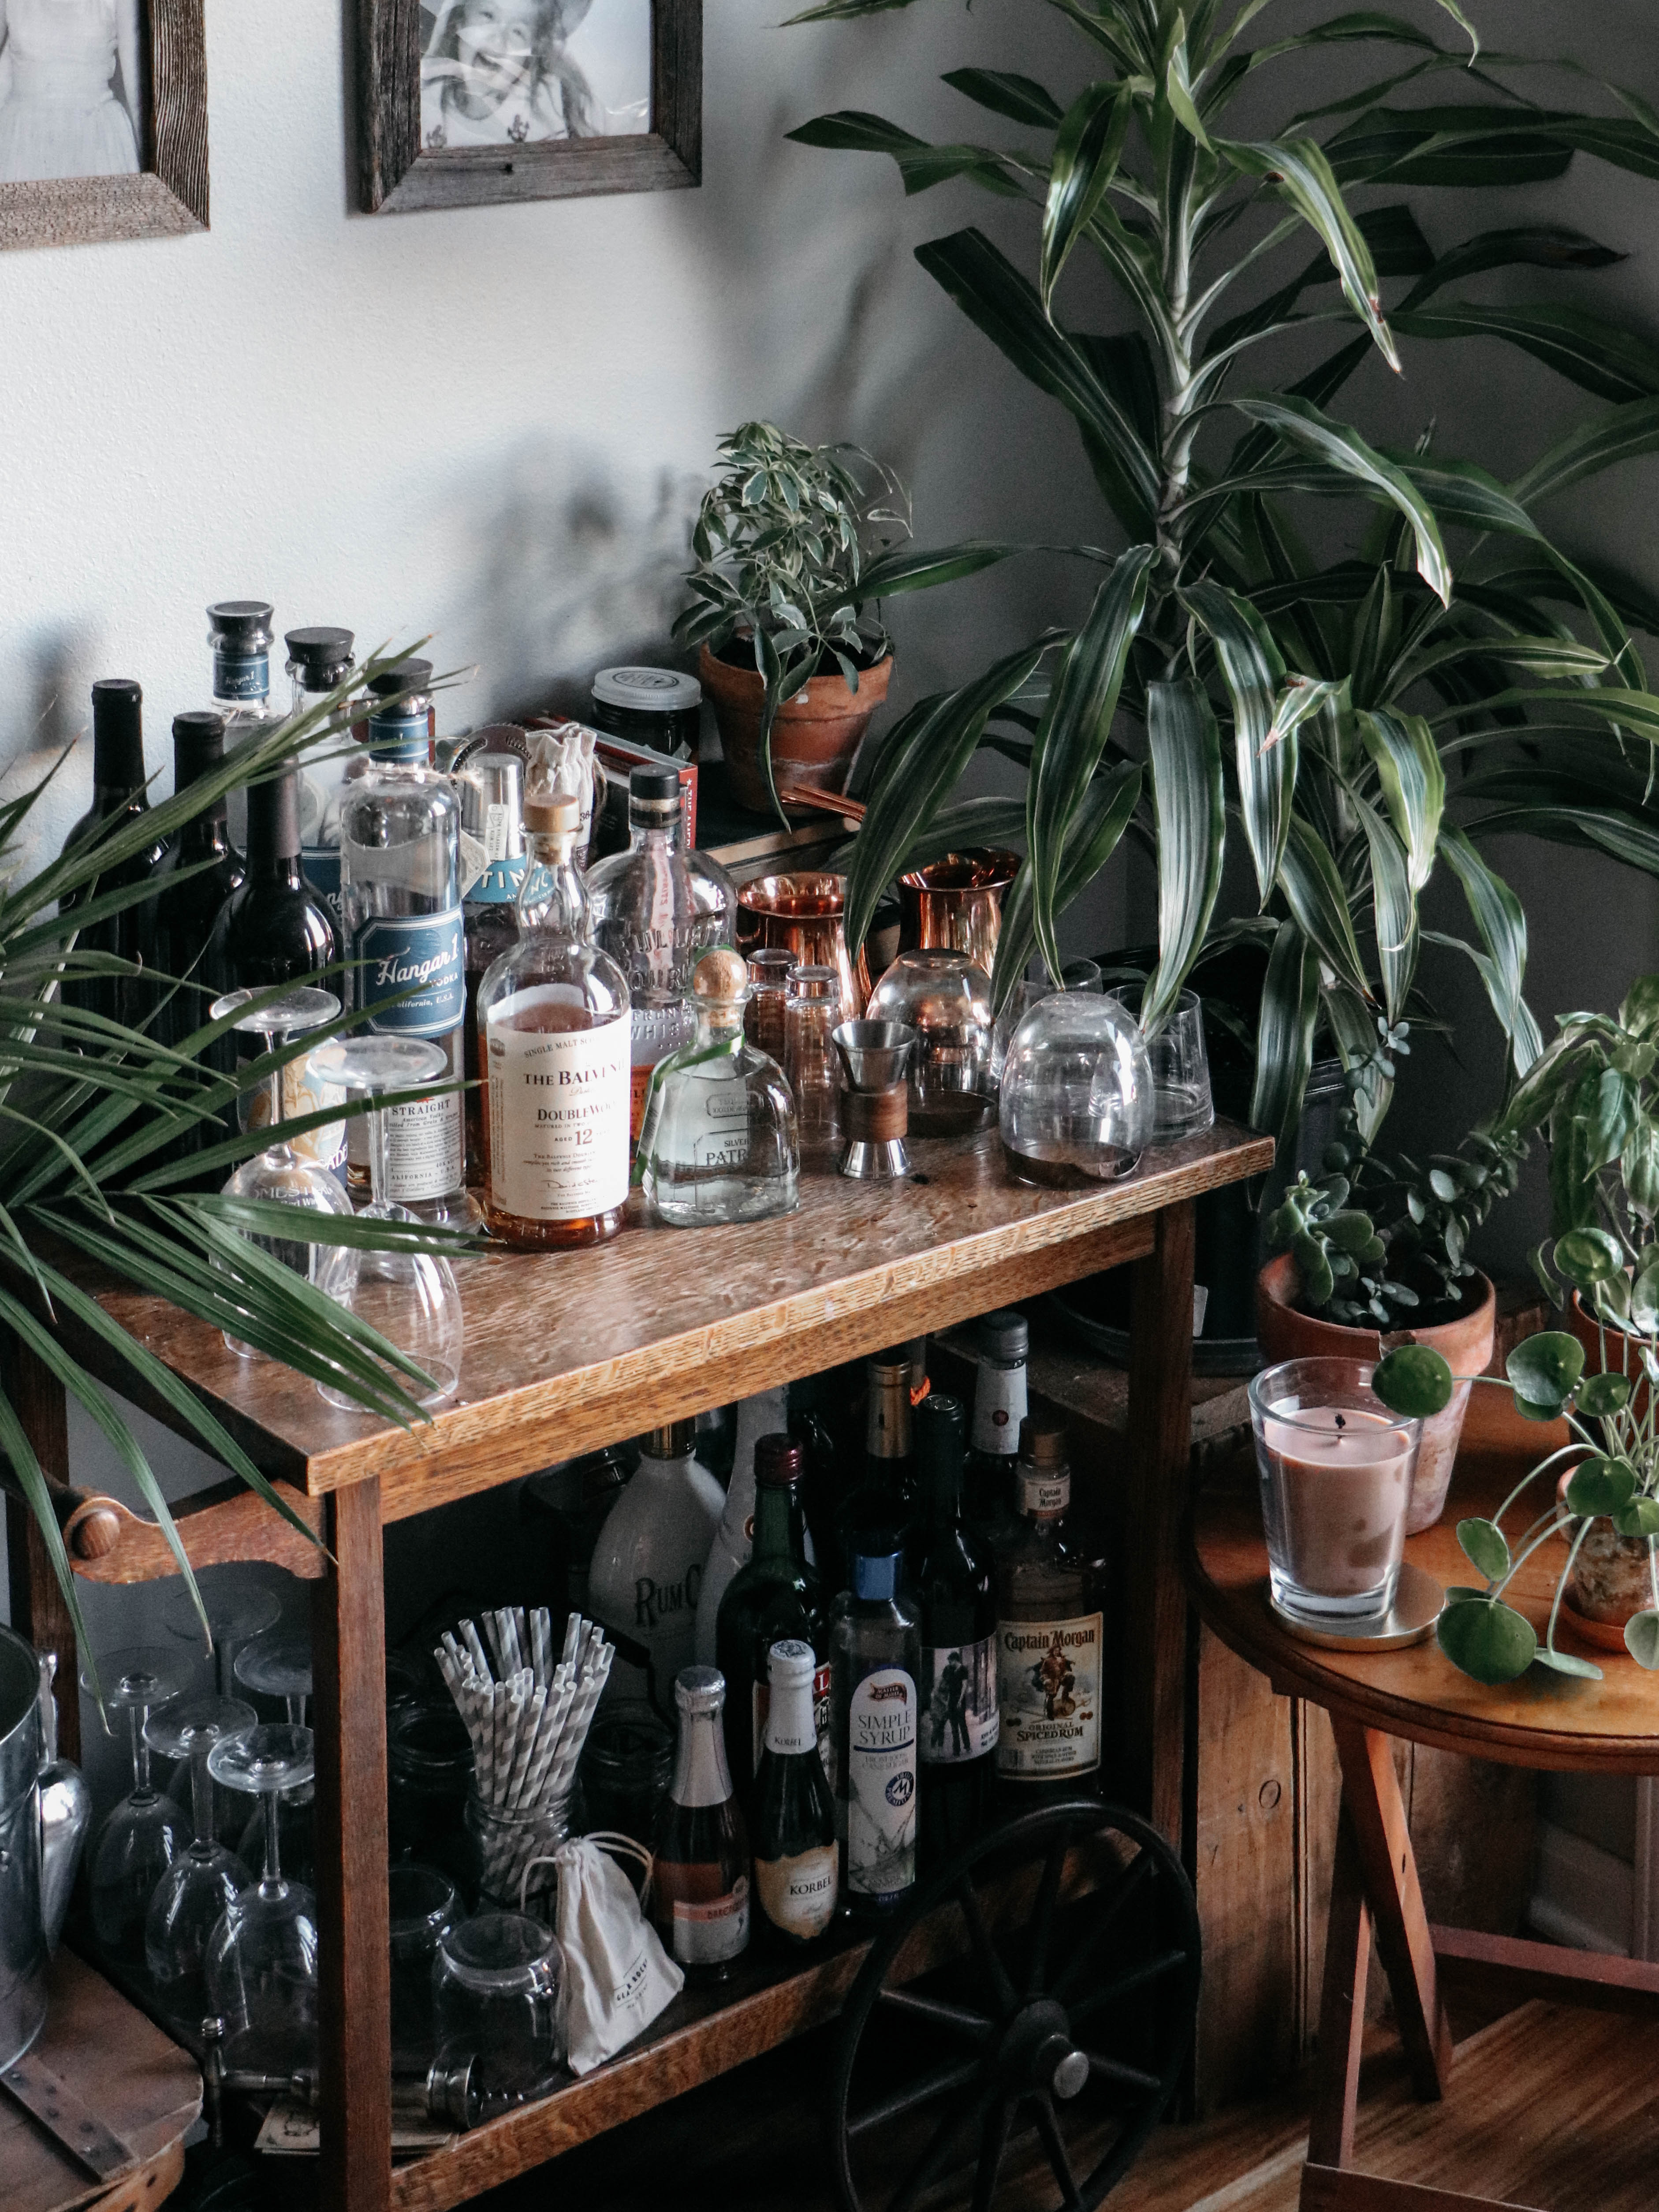 Plant Bar Cart / Why You Need House Plants in Your Home / Houseplants / Indoor Plants / House plants / Air Purifying / theanastasiaco.com @theanastasiaco